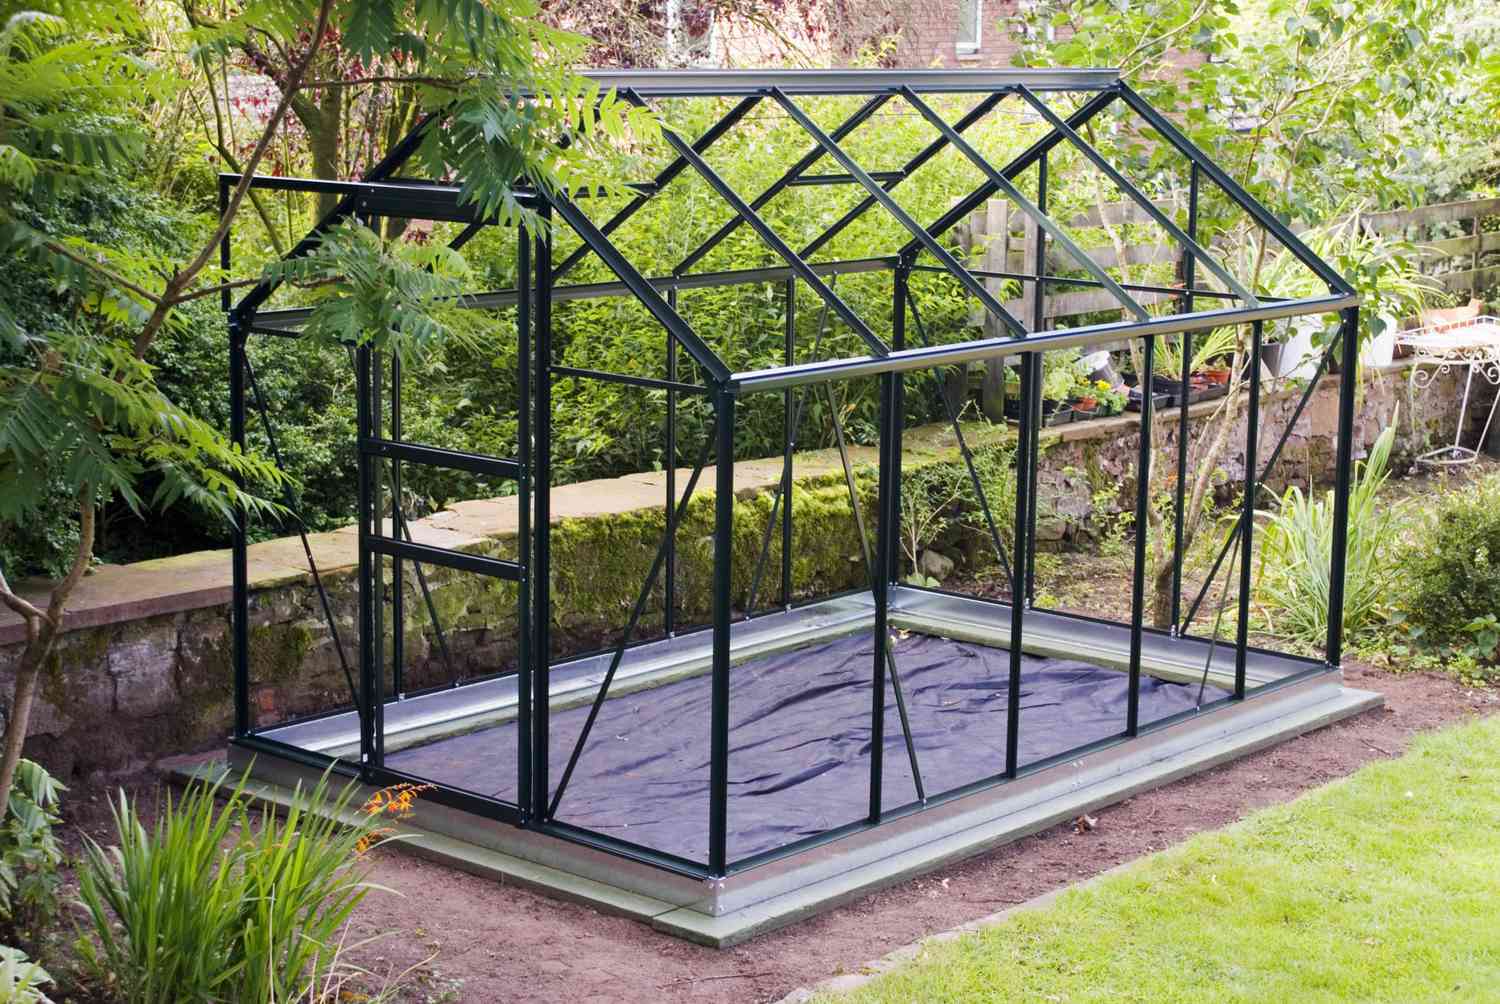 Glassless Greenhouse Frame on Foundation with Weed Control Fabric, UK